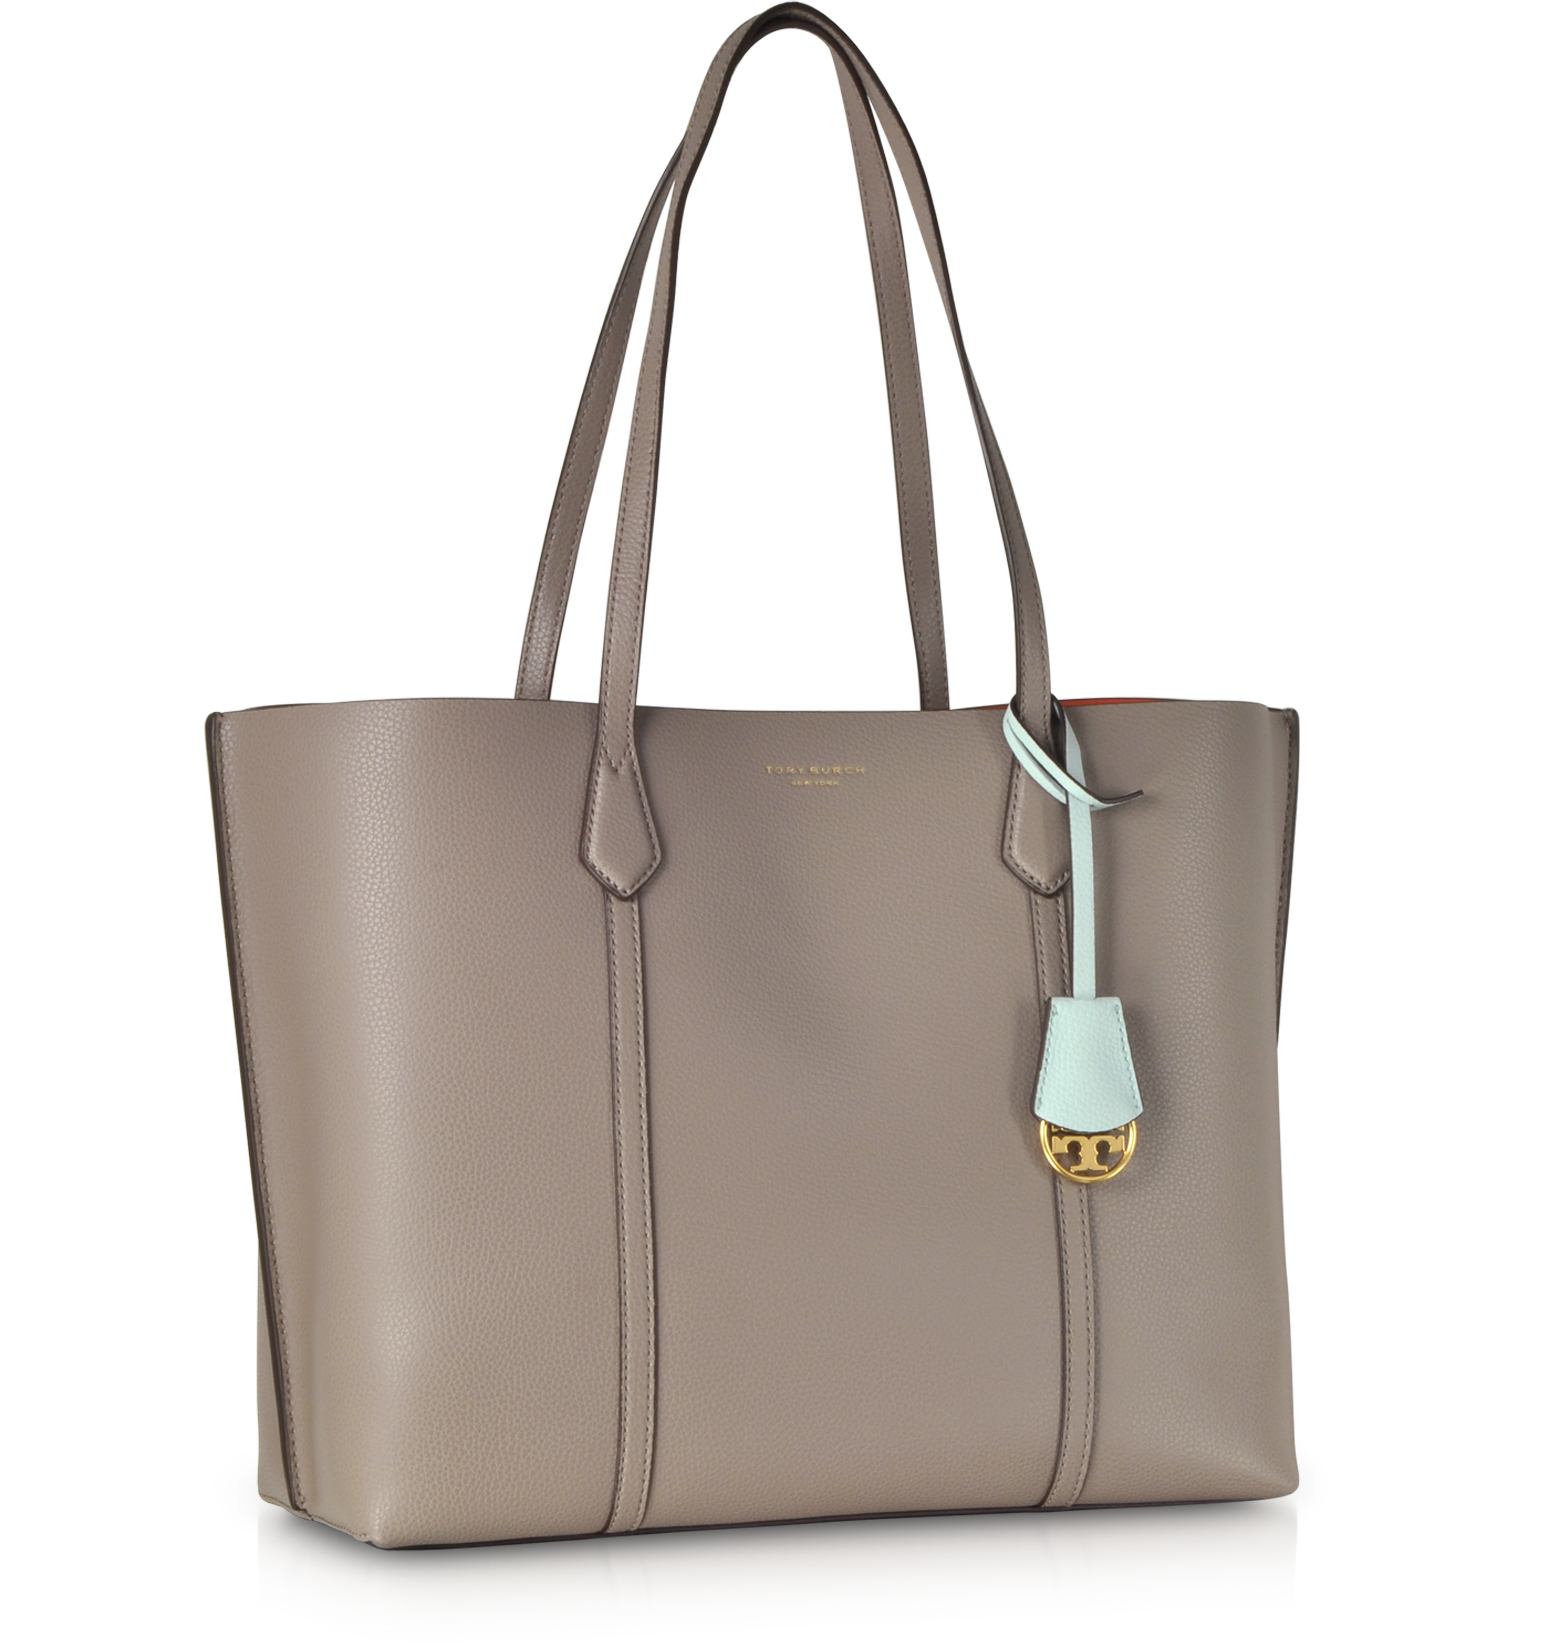 NEW Tory Burch Bay Gray Perry Triple Compartment Tote $448